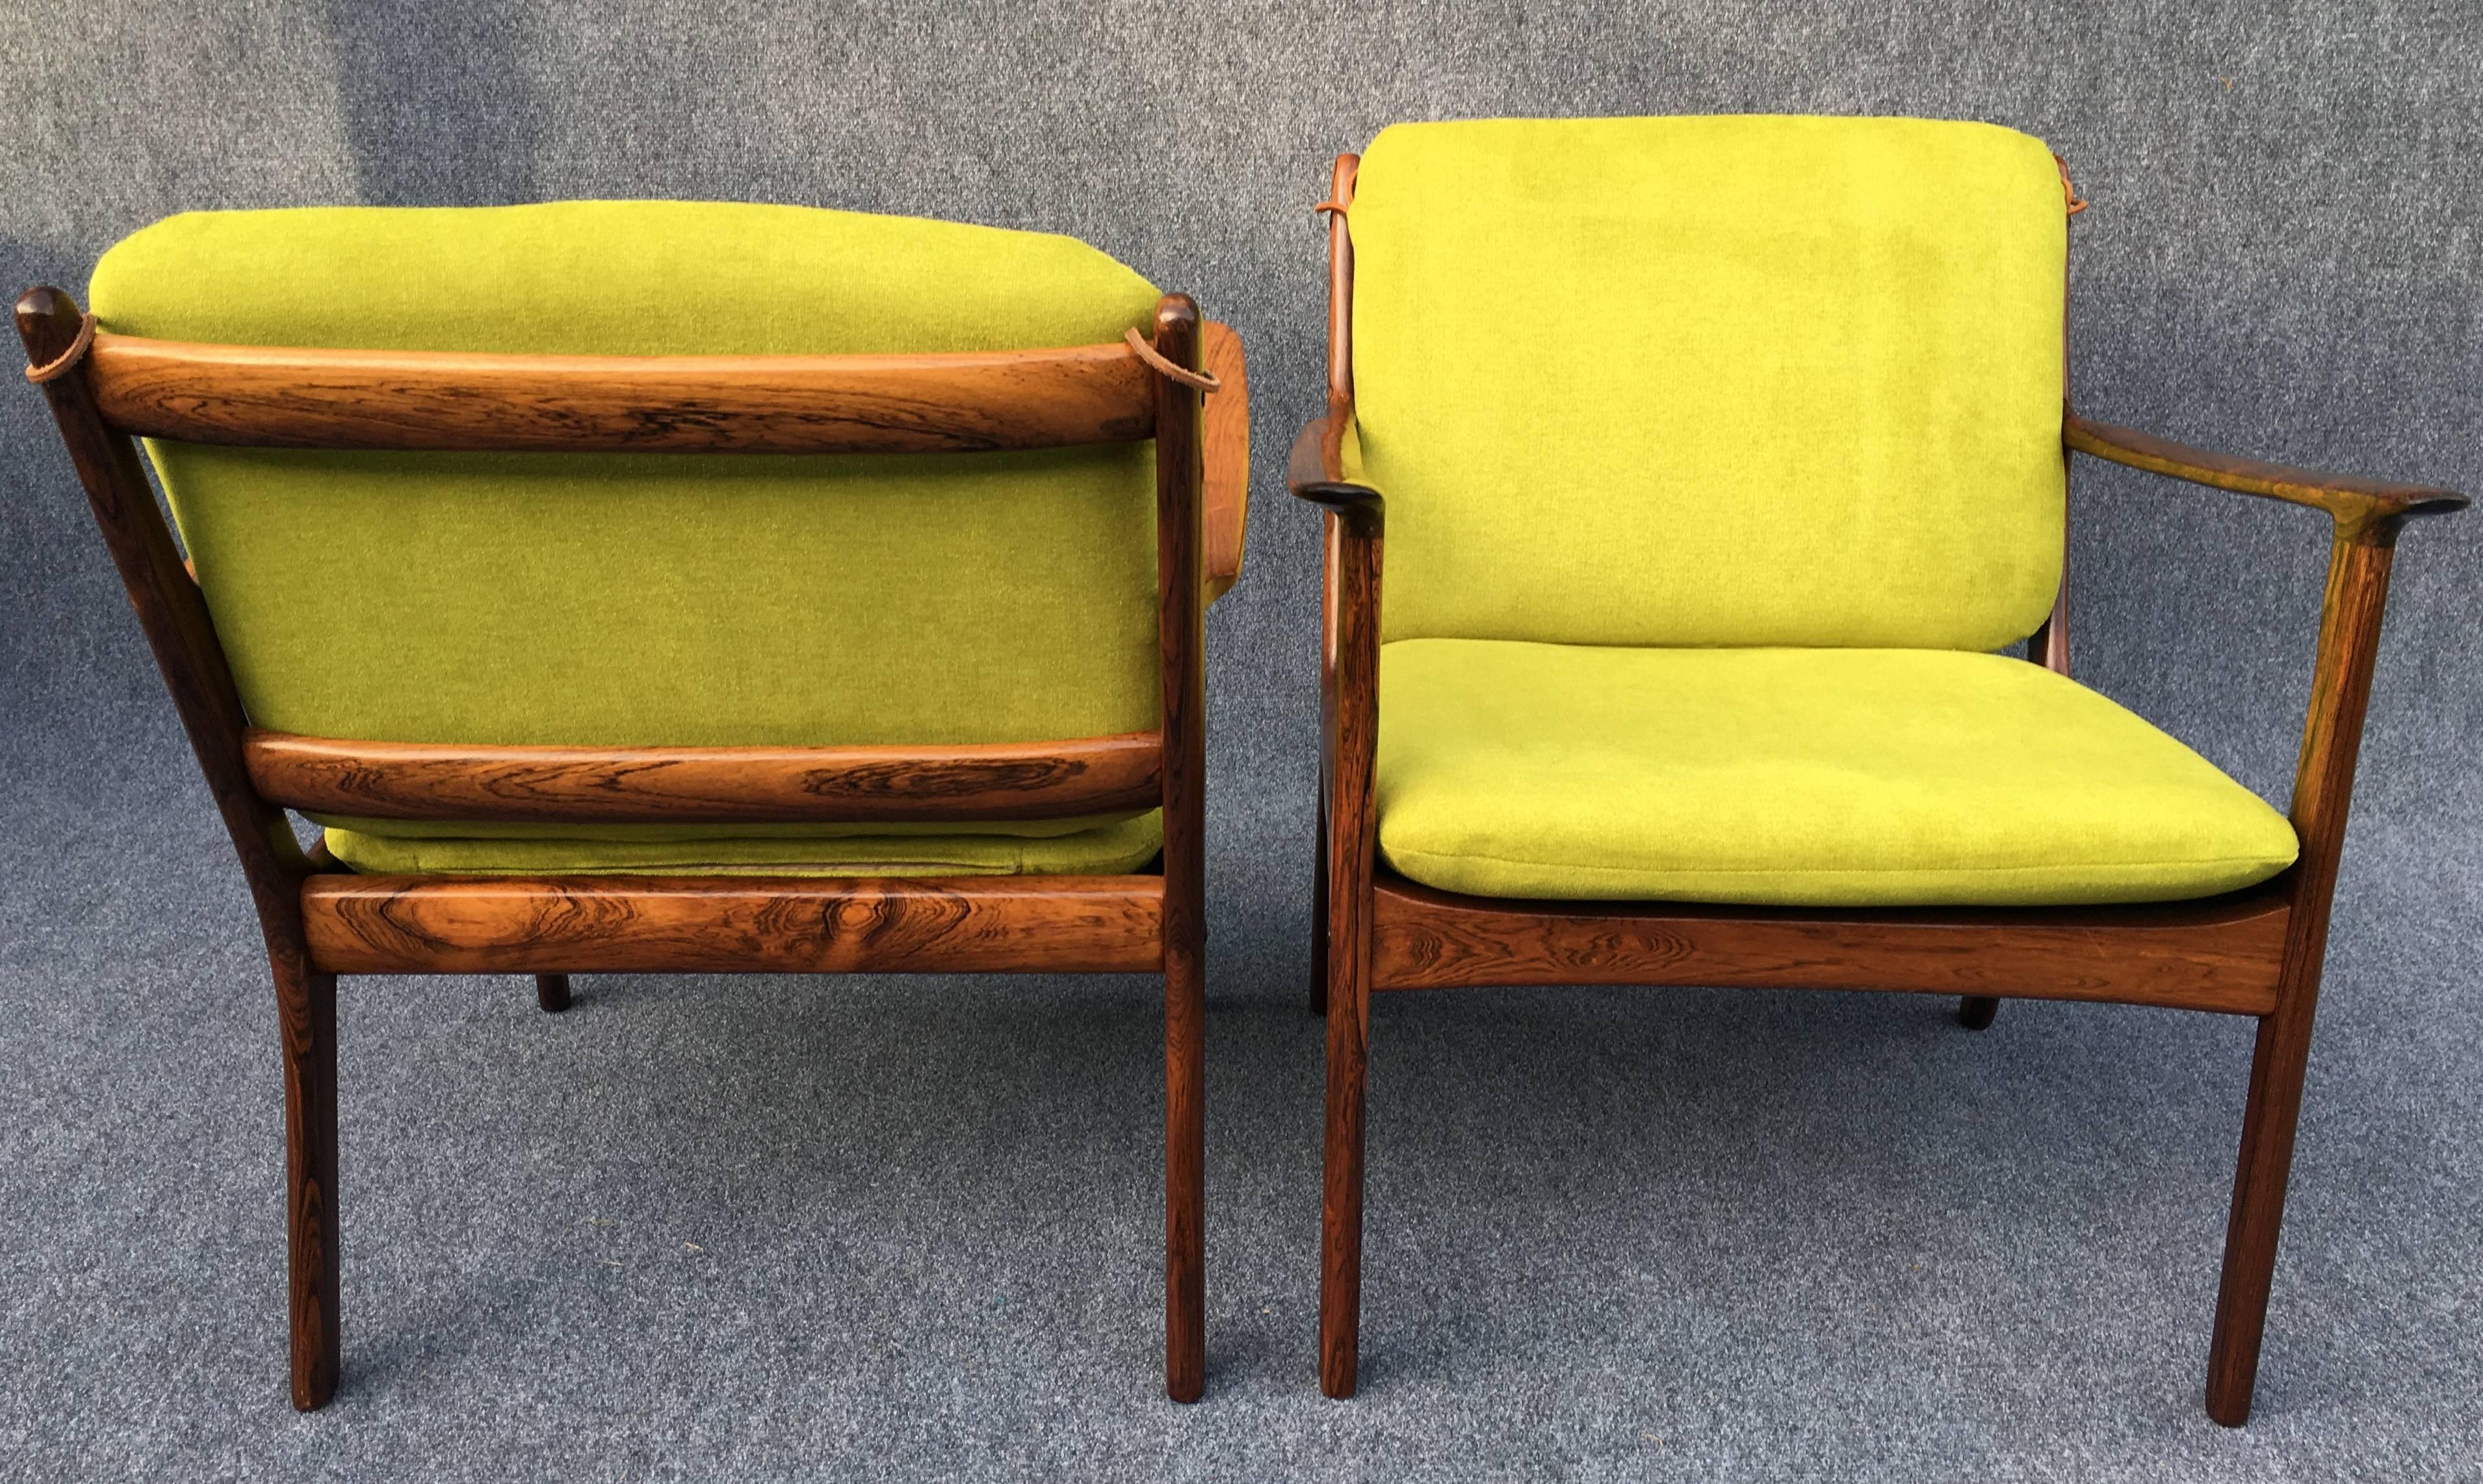 Mid-Century Modern Pair of Danish Rosewood 'PJ112' Armchairs by Ole Wanscher for Poul Jeppersen